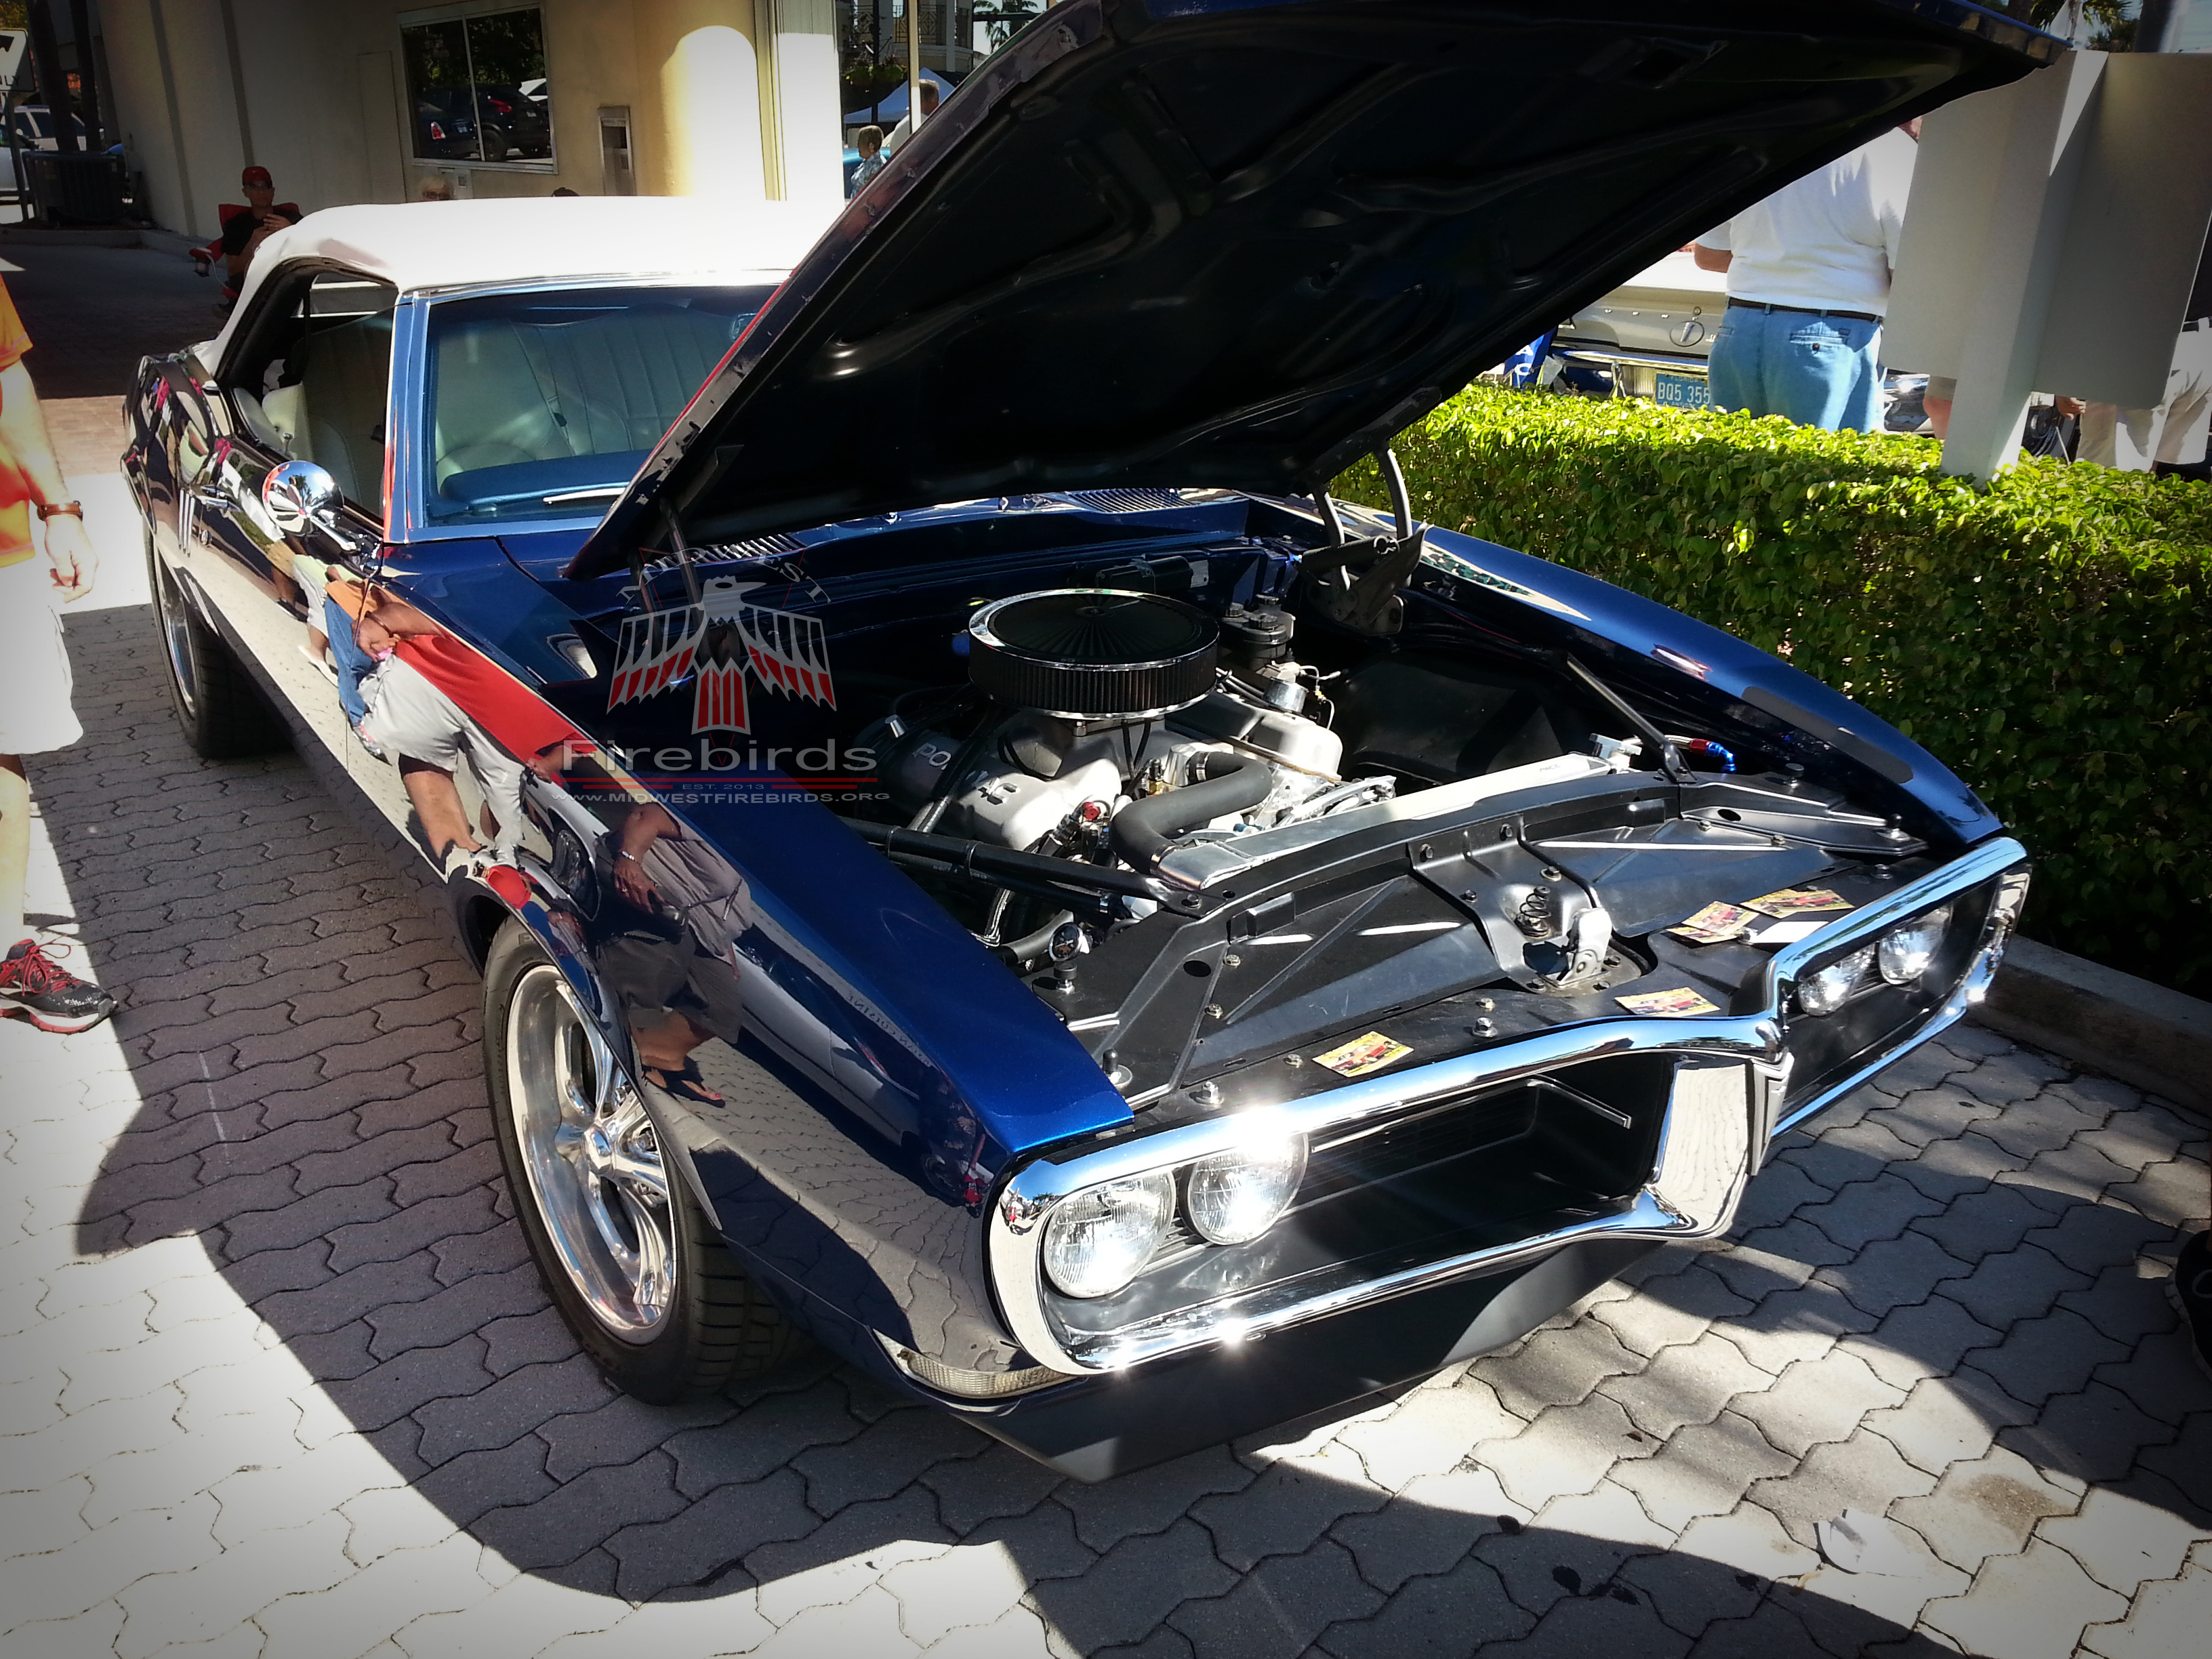 First-generation Pontiac Firebirds on display at the Cars on 5th car show in Naples, Florida.